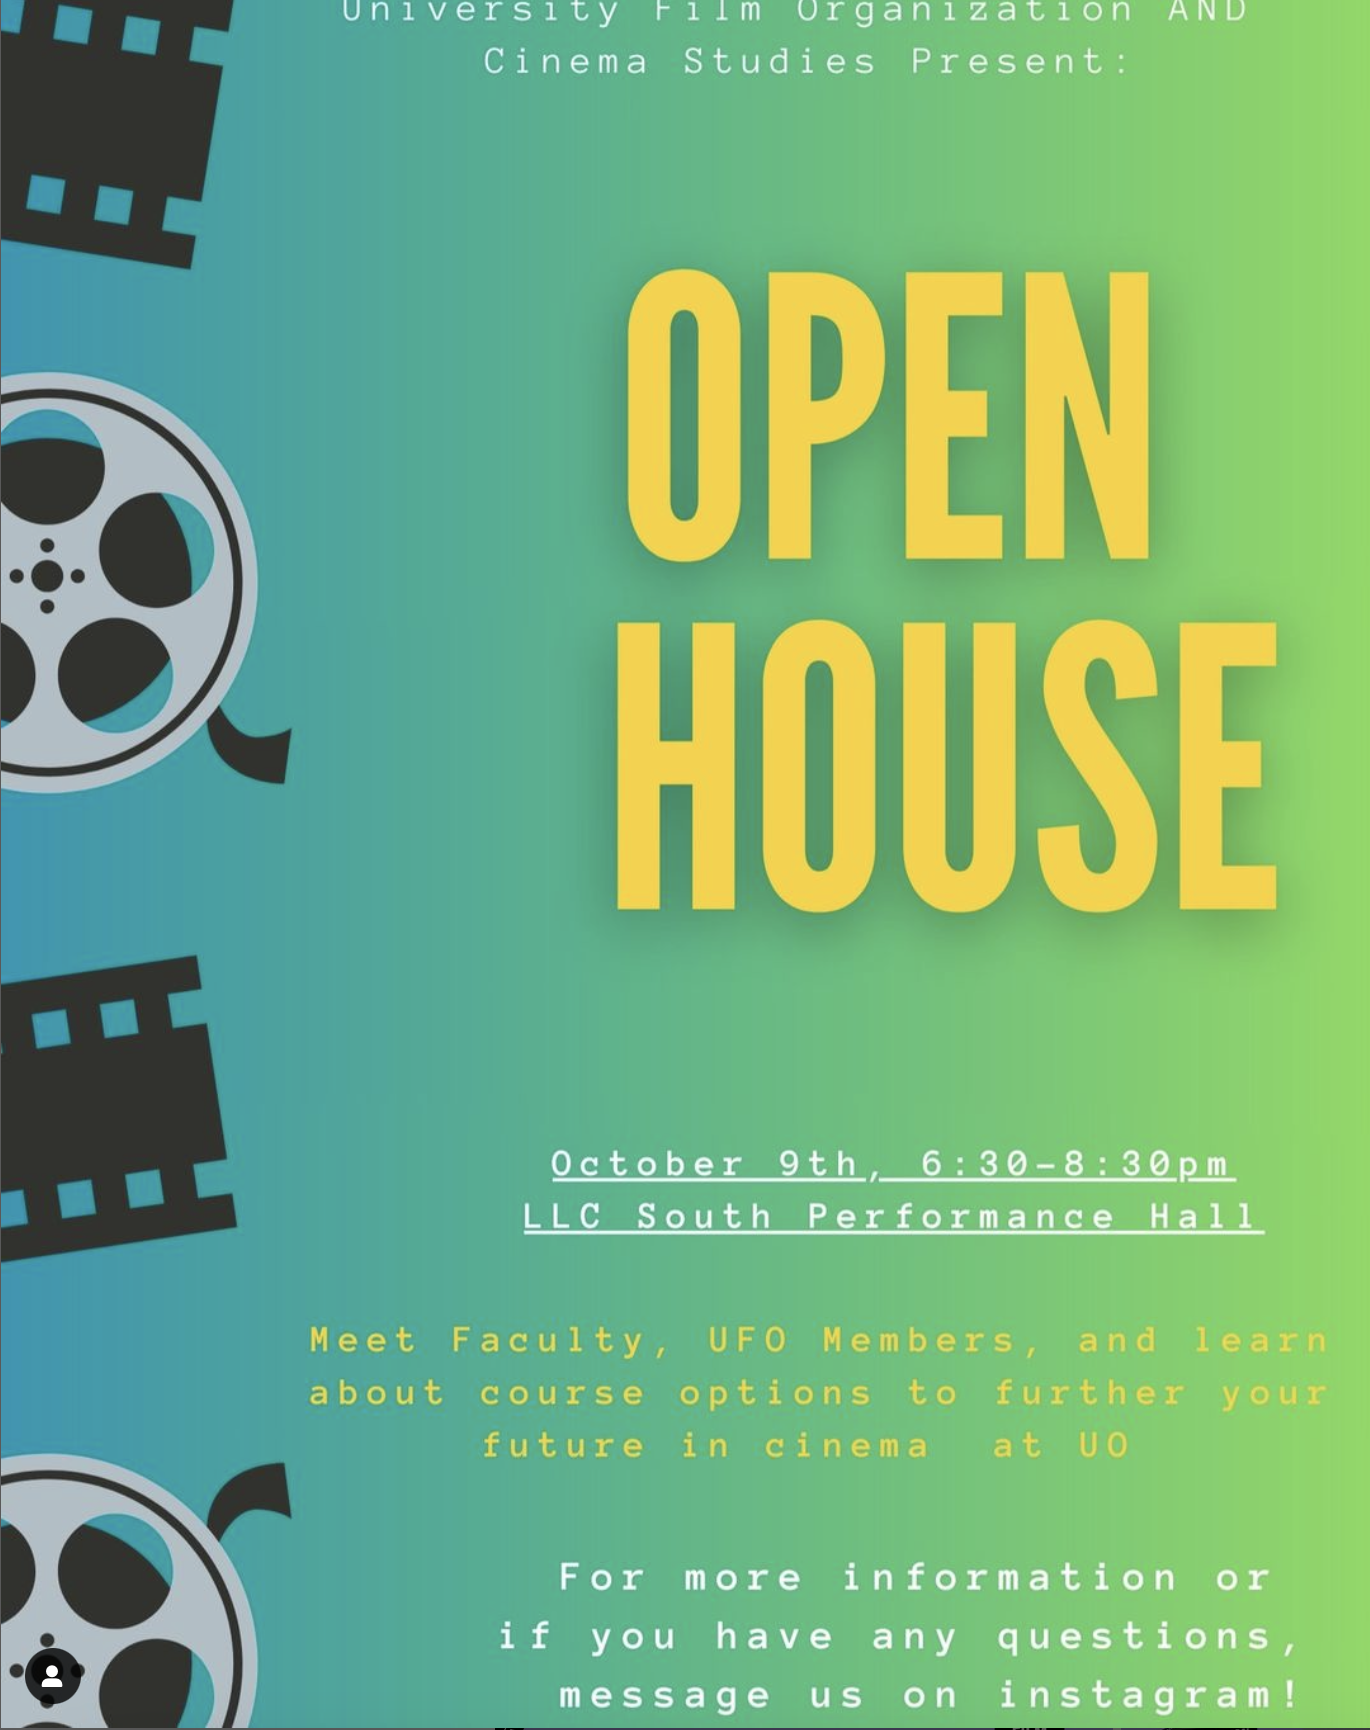 UFO and CINE Open House